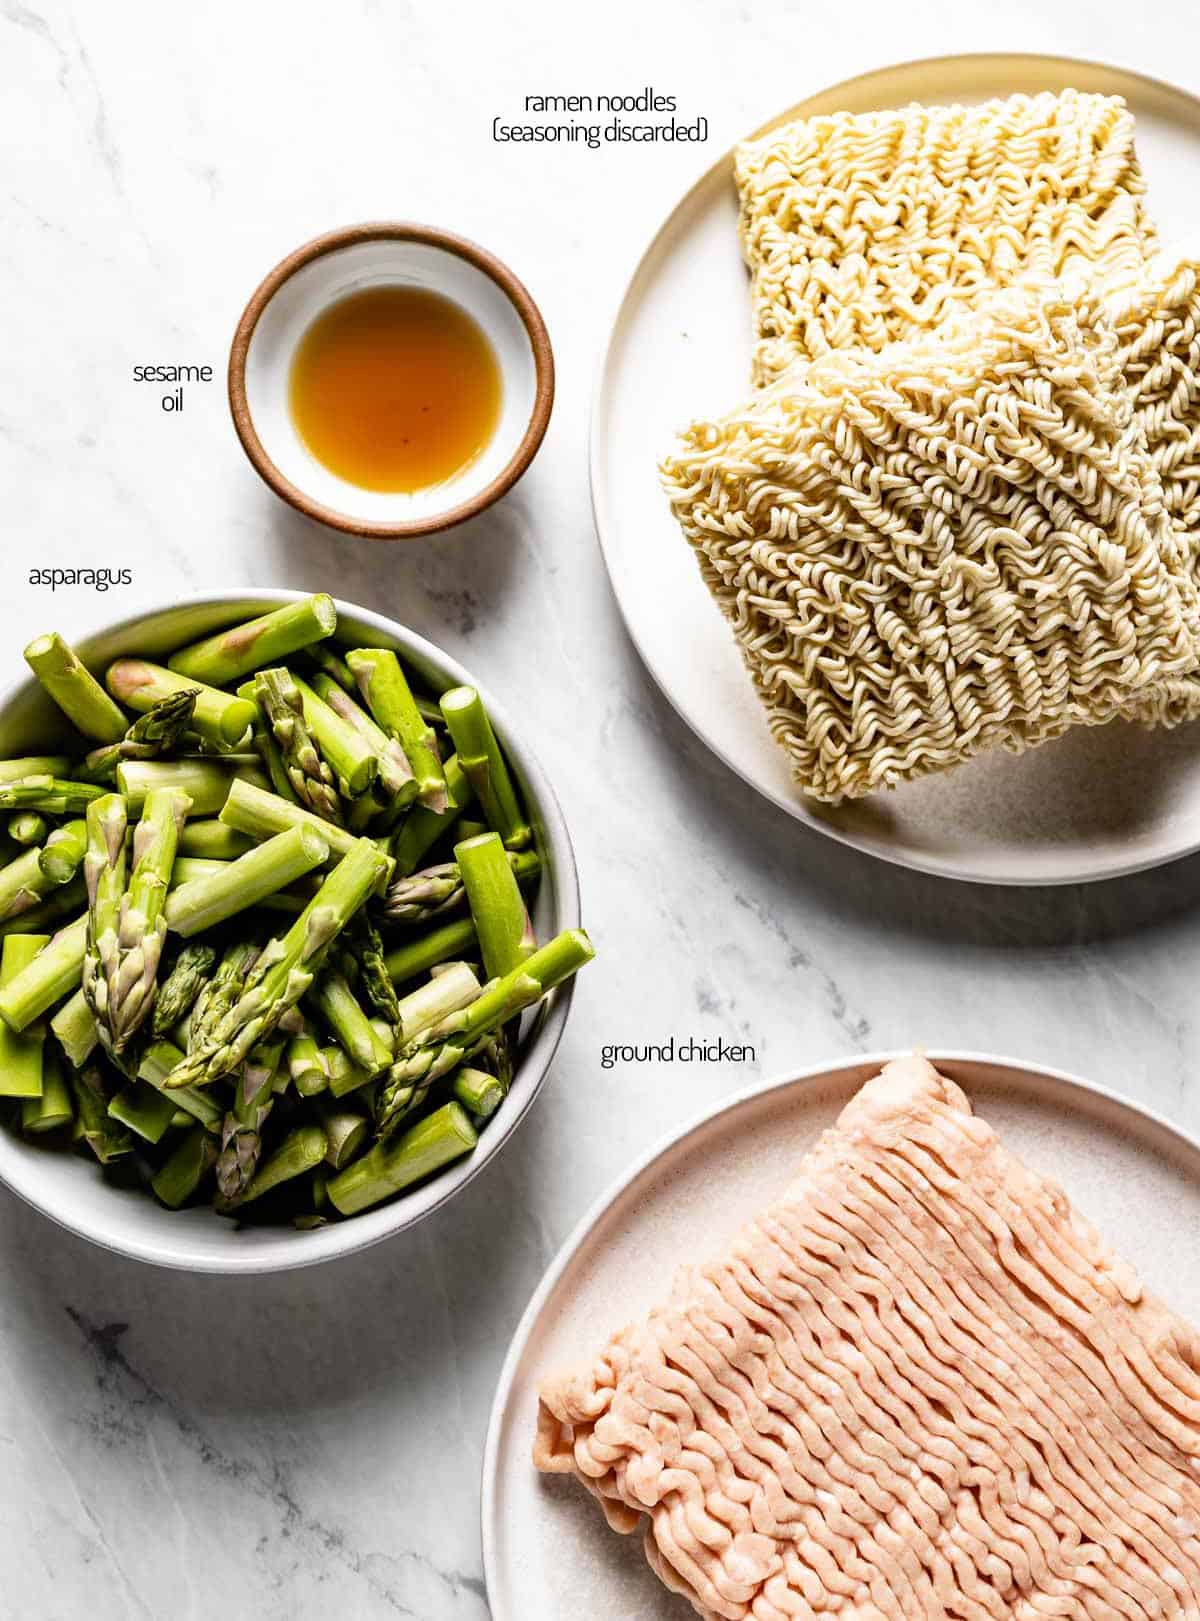 ingredients including asparagus, ramen noodles, and ground chicken on a marble backdrop